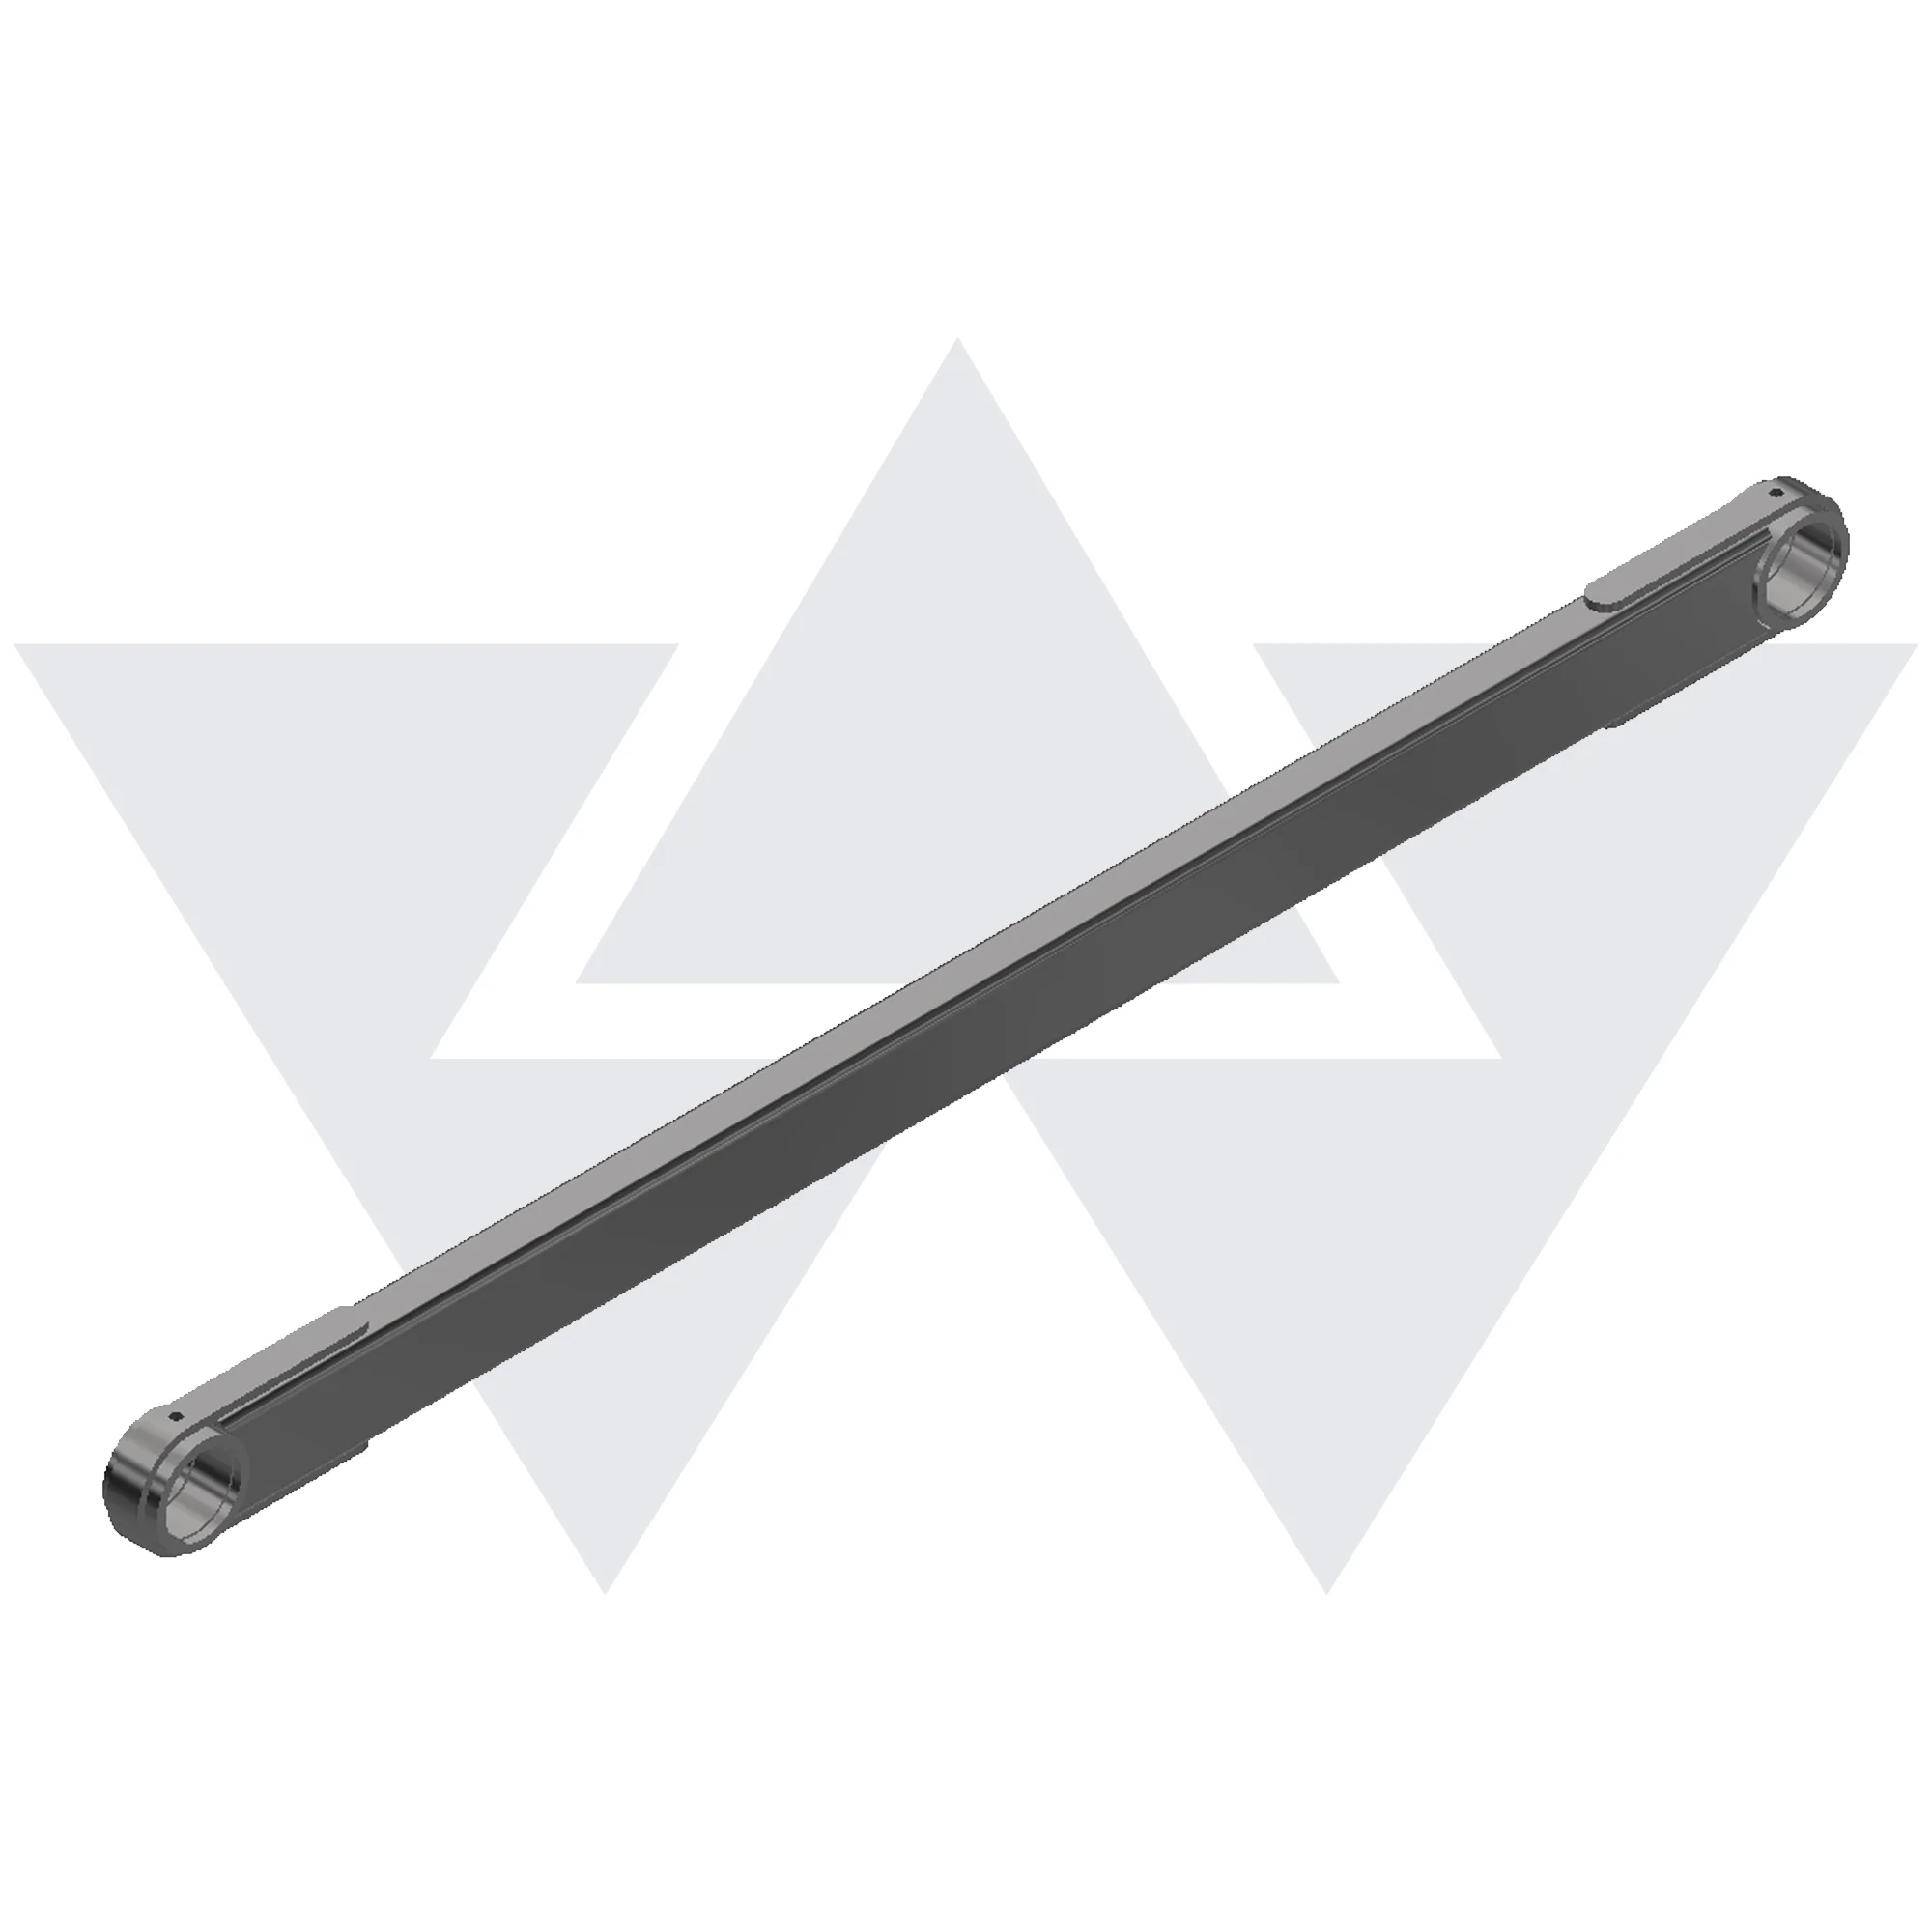 Wastebuilt® Replacement for Heil Level Link